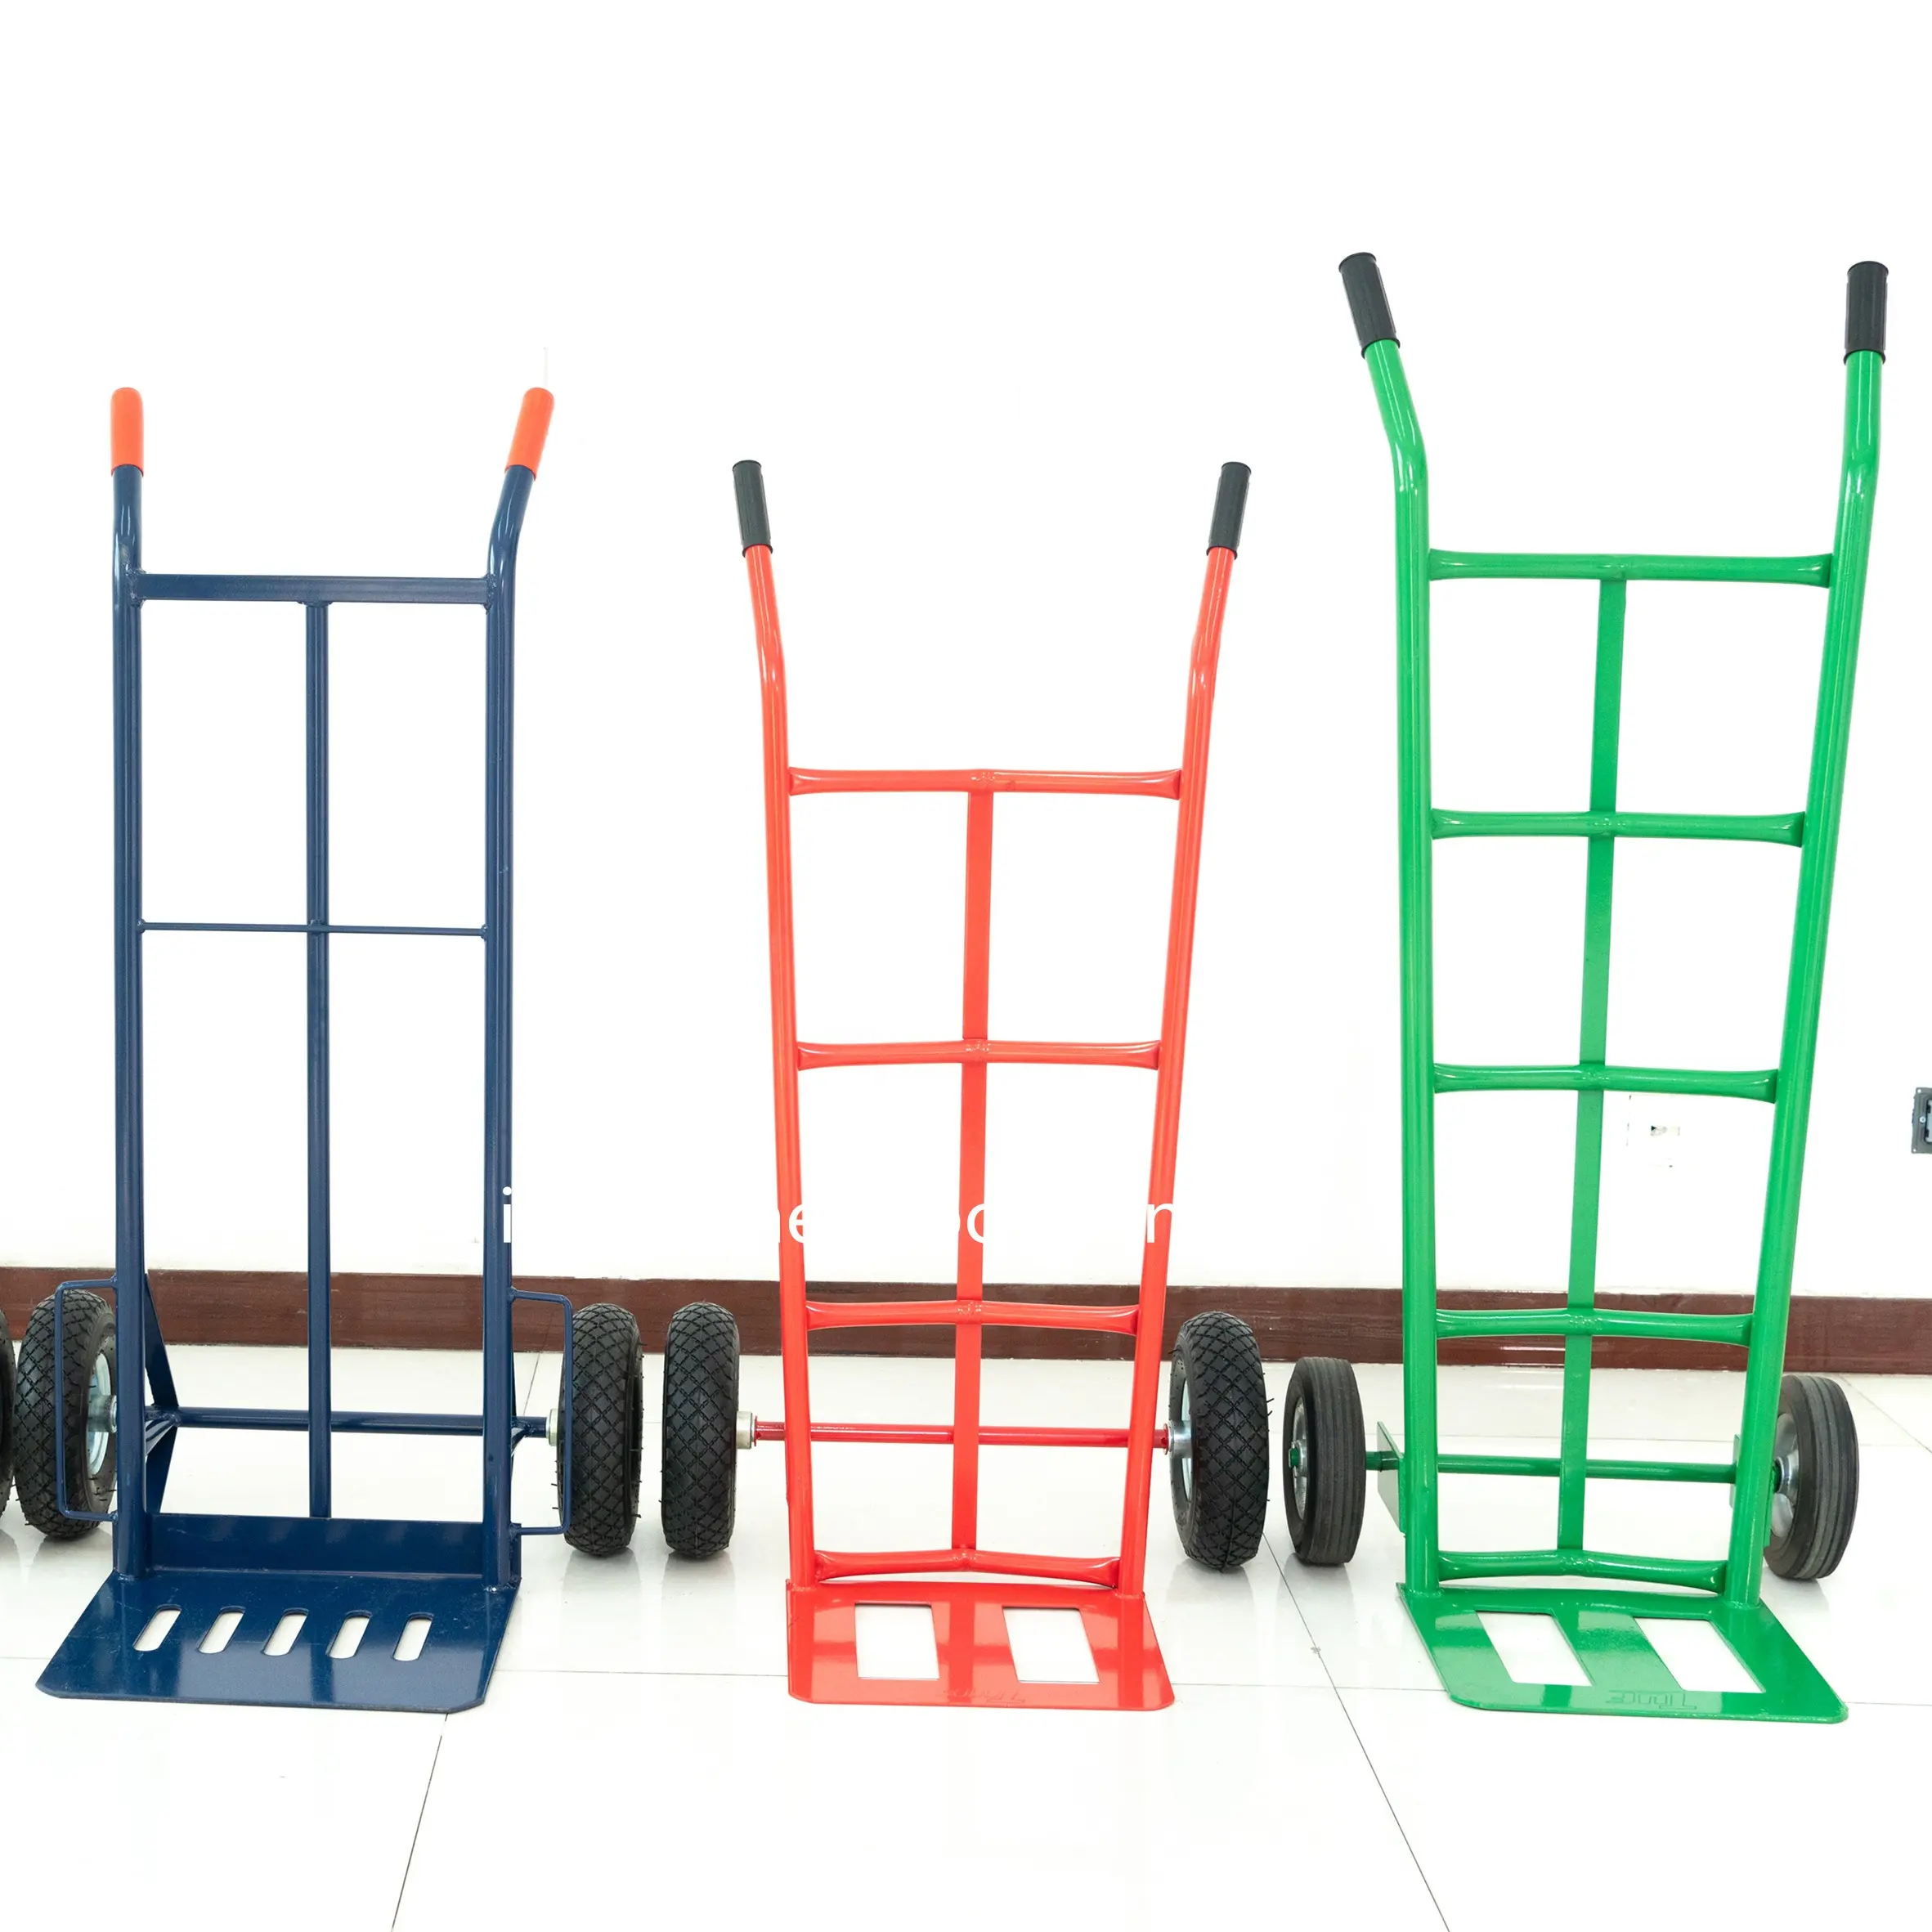 250kg capacity heavy duty all-terrain hand truck with solid wheel southeast asia market hand trolley move tool cart HT1584